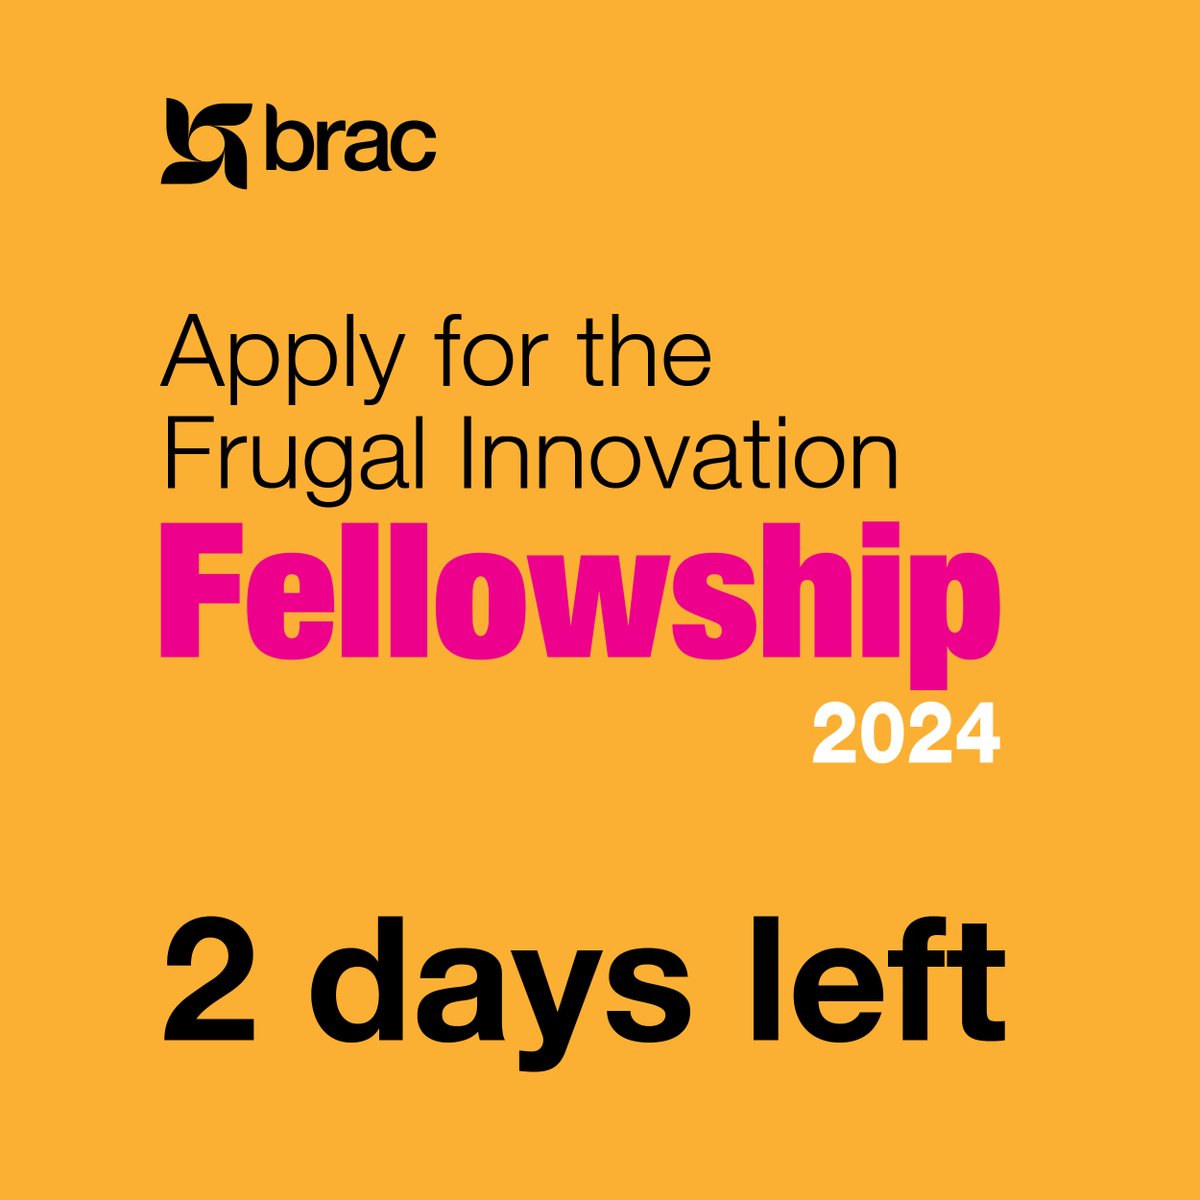 Only two days left to apply for BRAC’s Frugal Innovation Fellowship! Stand a chance to connect with like-minded climate adaptation practitioners, receive mentorship from industry leaders and present your work at BRAC’s Frugal Innovation Forum 2024 by joining the fellowship.